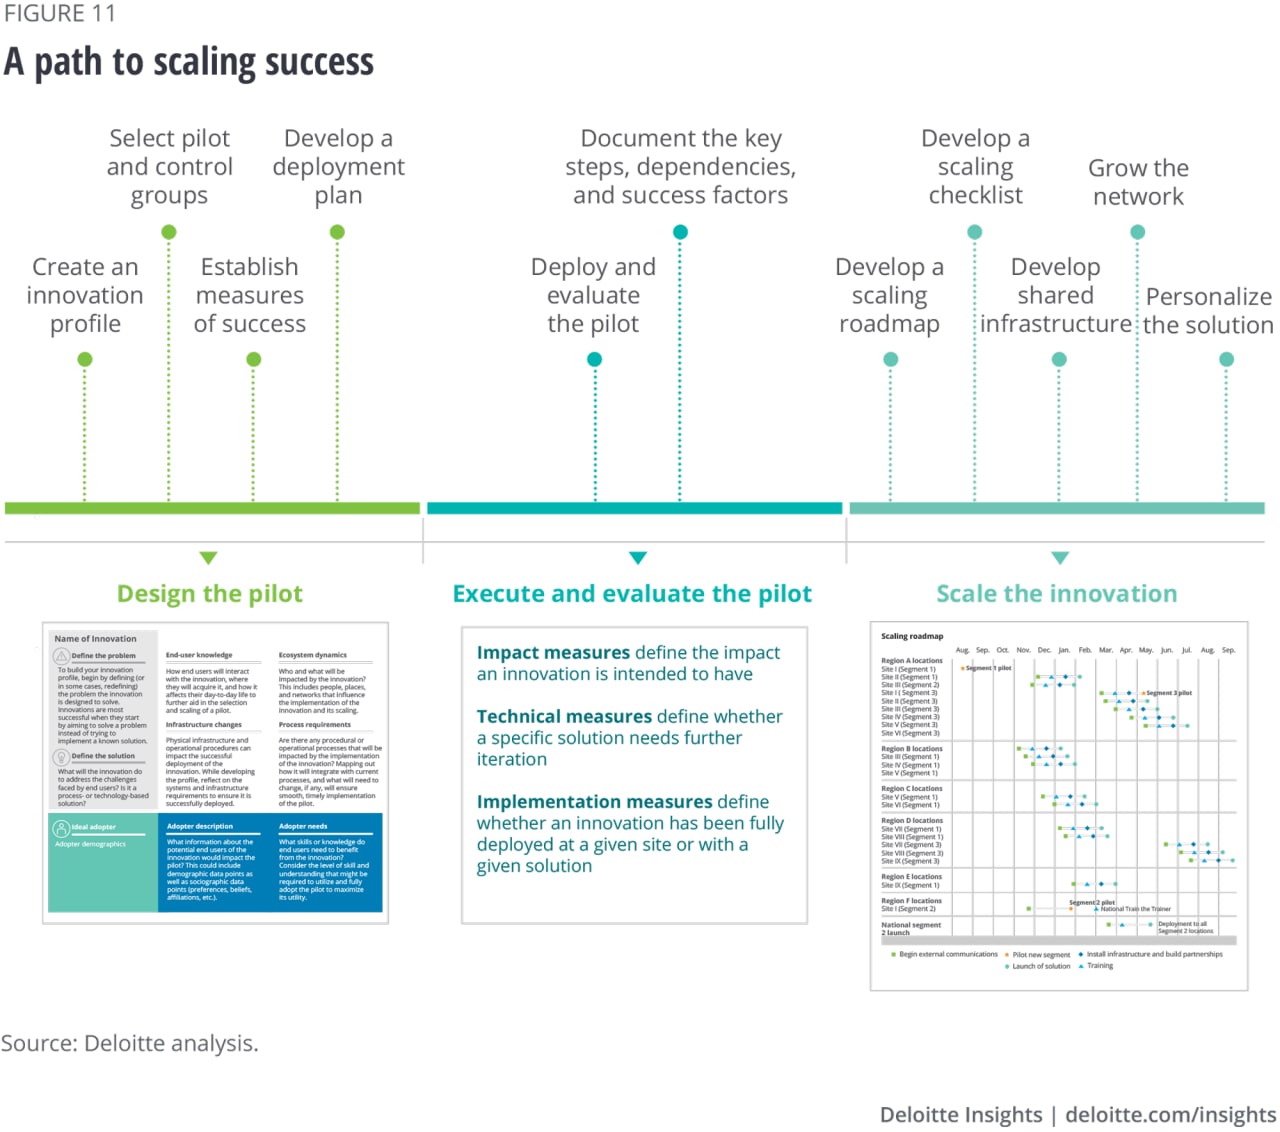 Figure 11. How to scale success